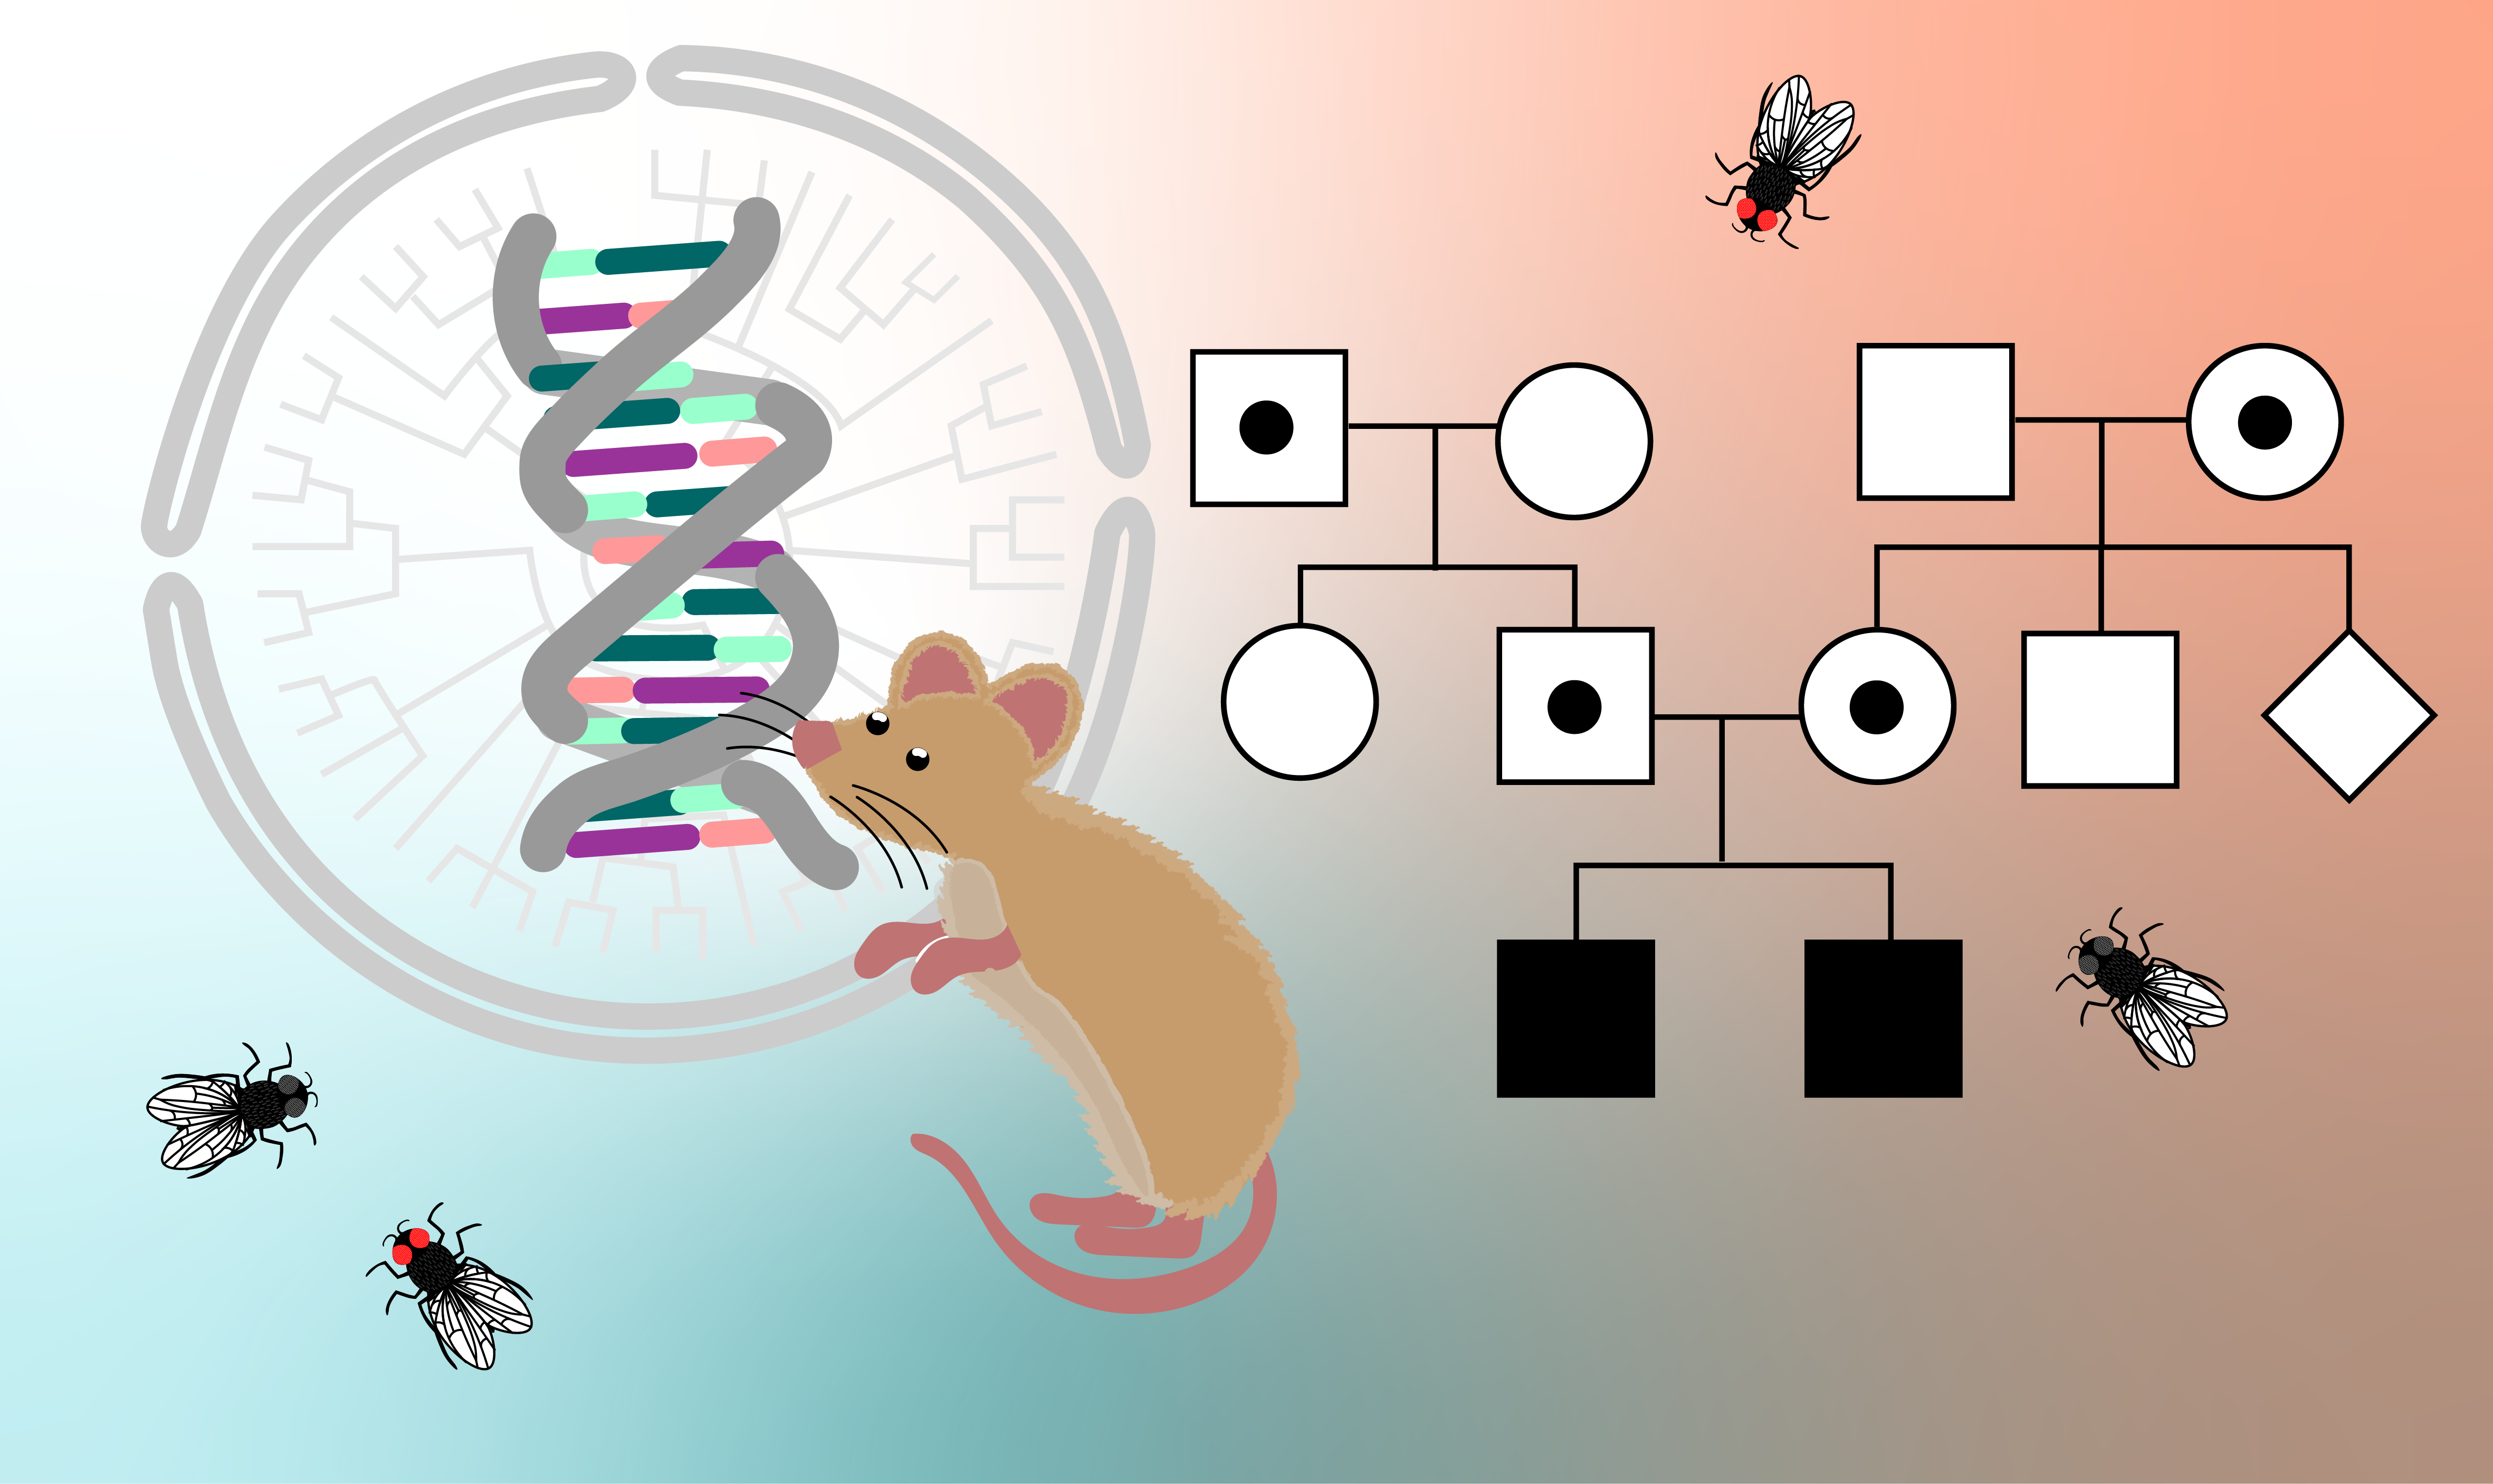 7.03x course image including a pedigree and mouse